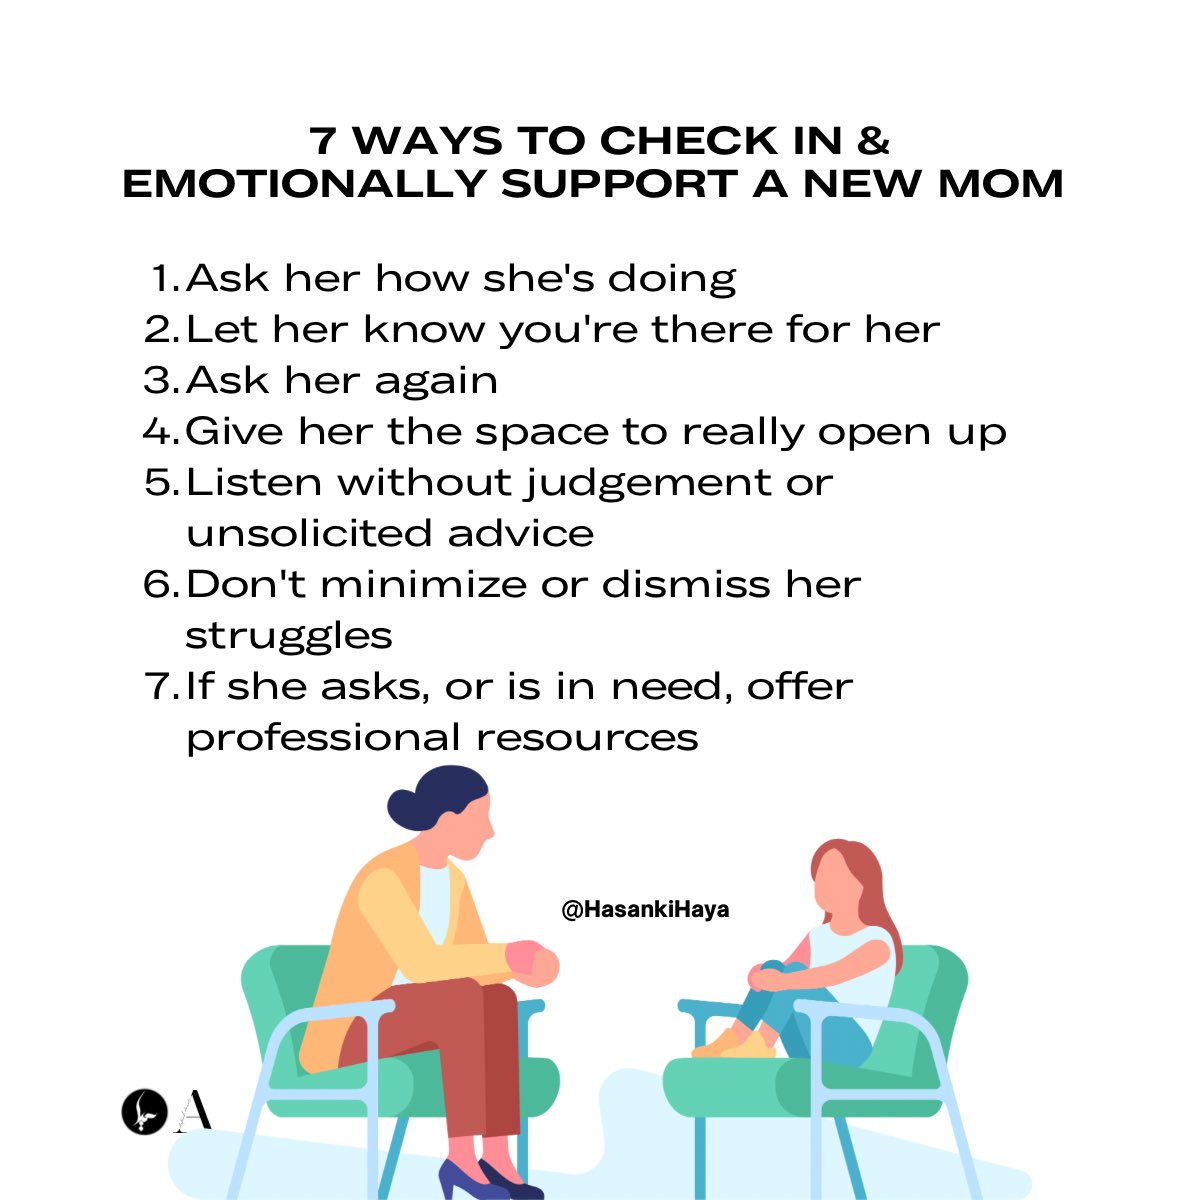 7 Ways to Check In & Emotionally Support a New Mom 🤱❤️

#NewMomSupport #CheckInOnHer #EmotionalSupport #ListeningWithoutJudgement #BeThereForHer #PostpartumSupport #HayaHasan